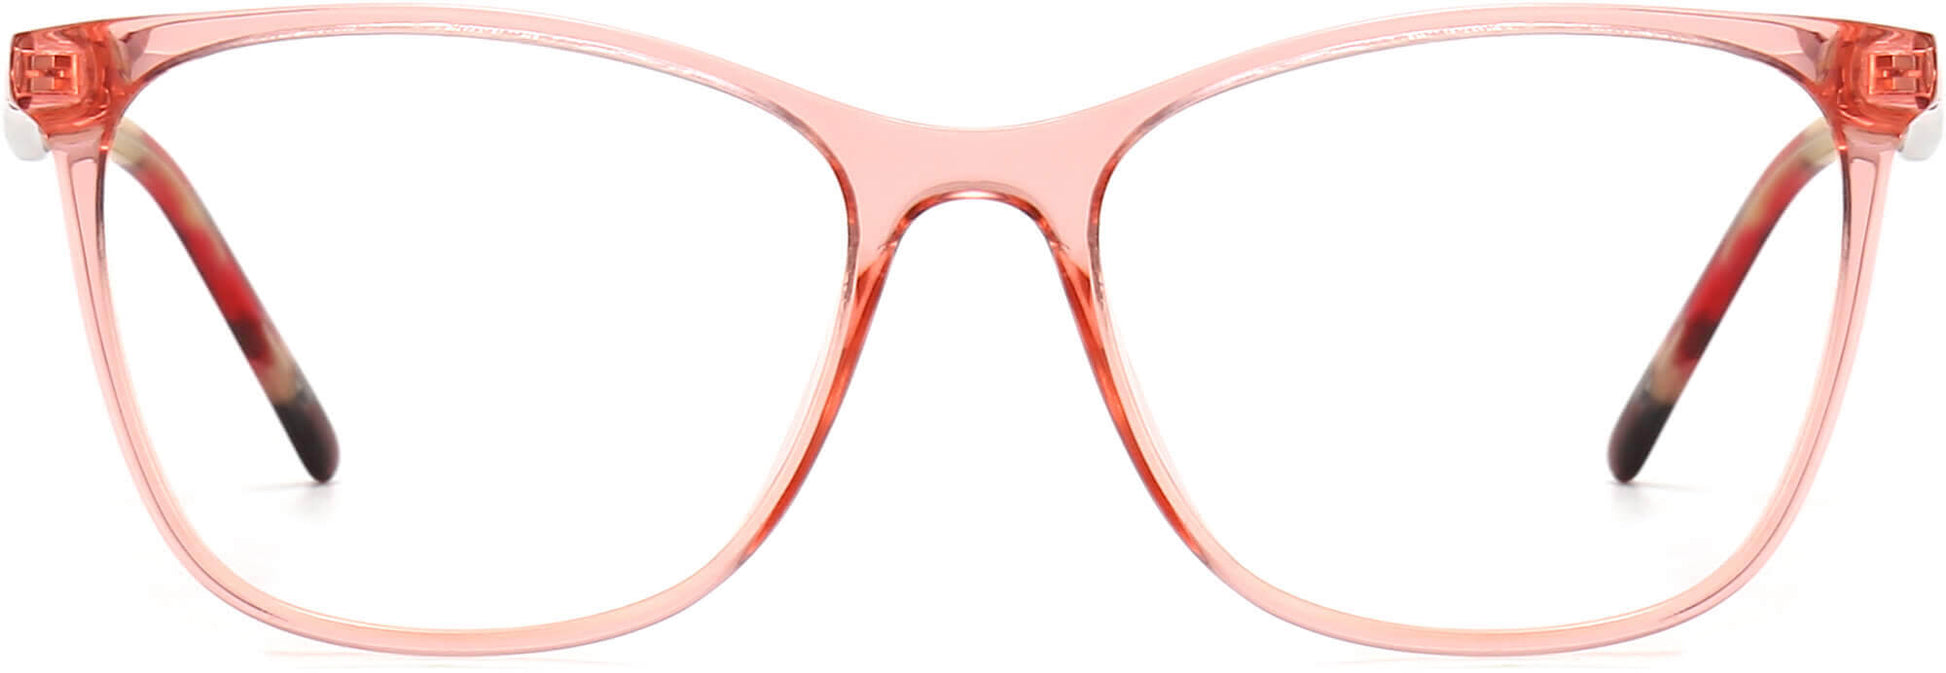 Joanna Cateye Pink Eyeglasses from ANRRI, front view